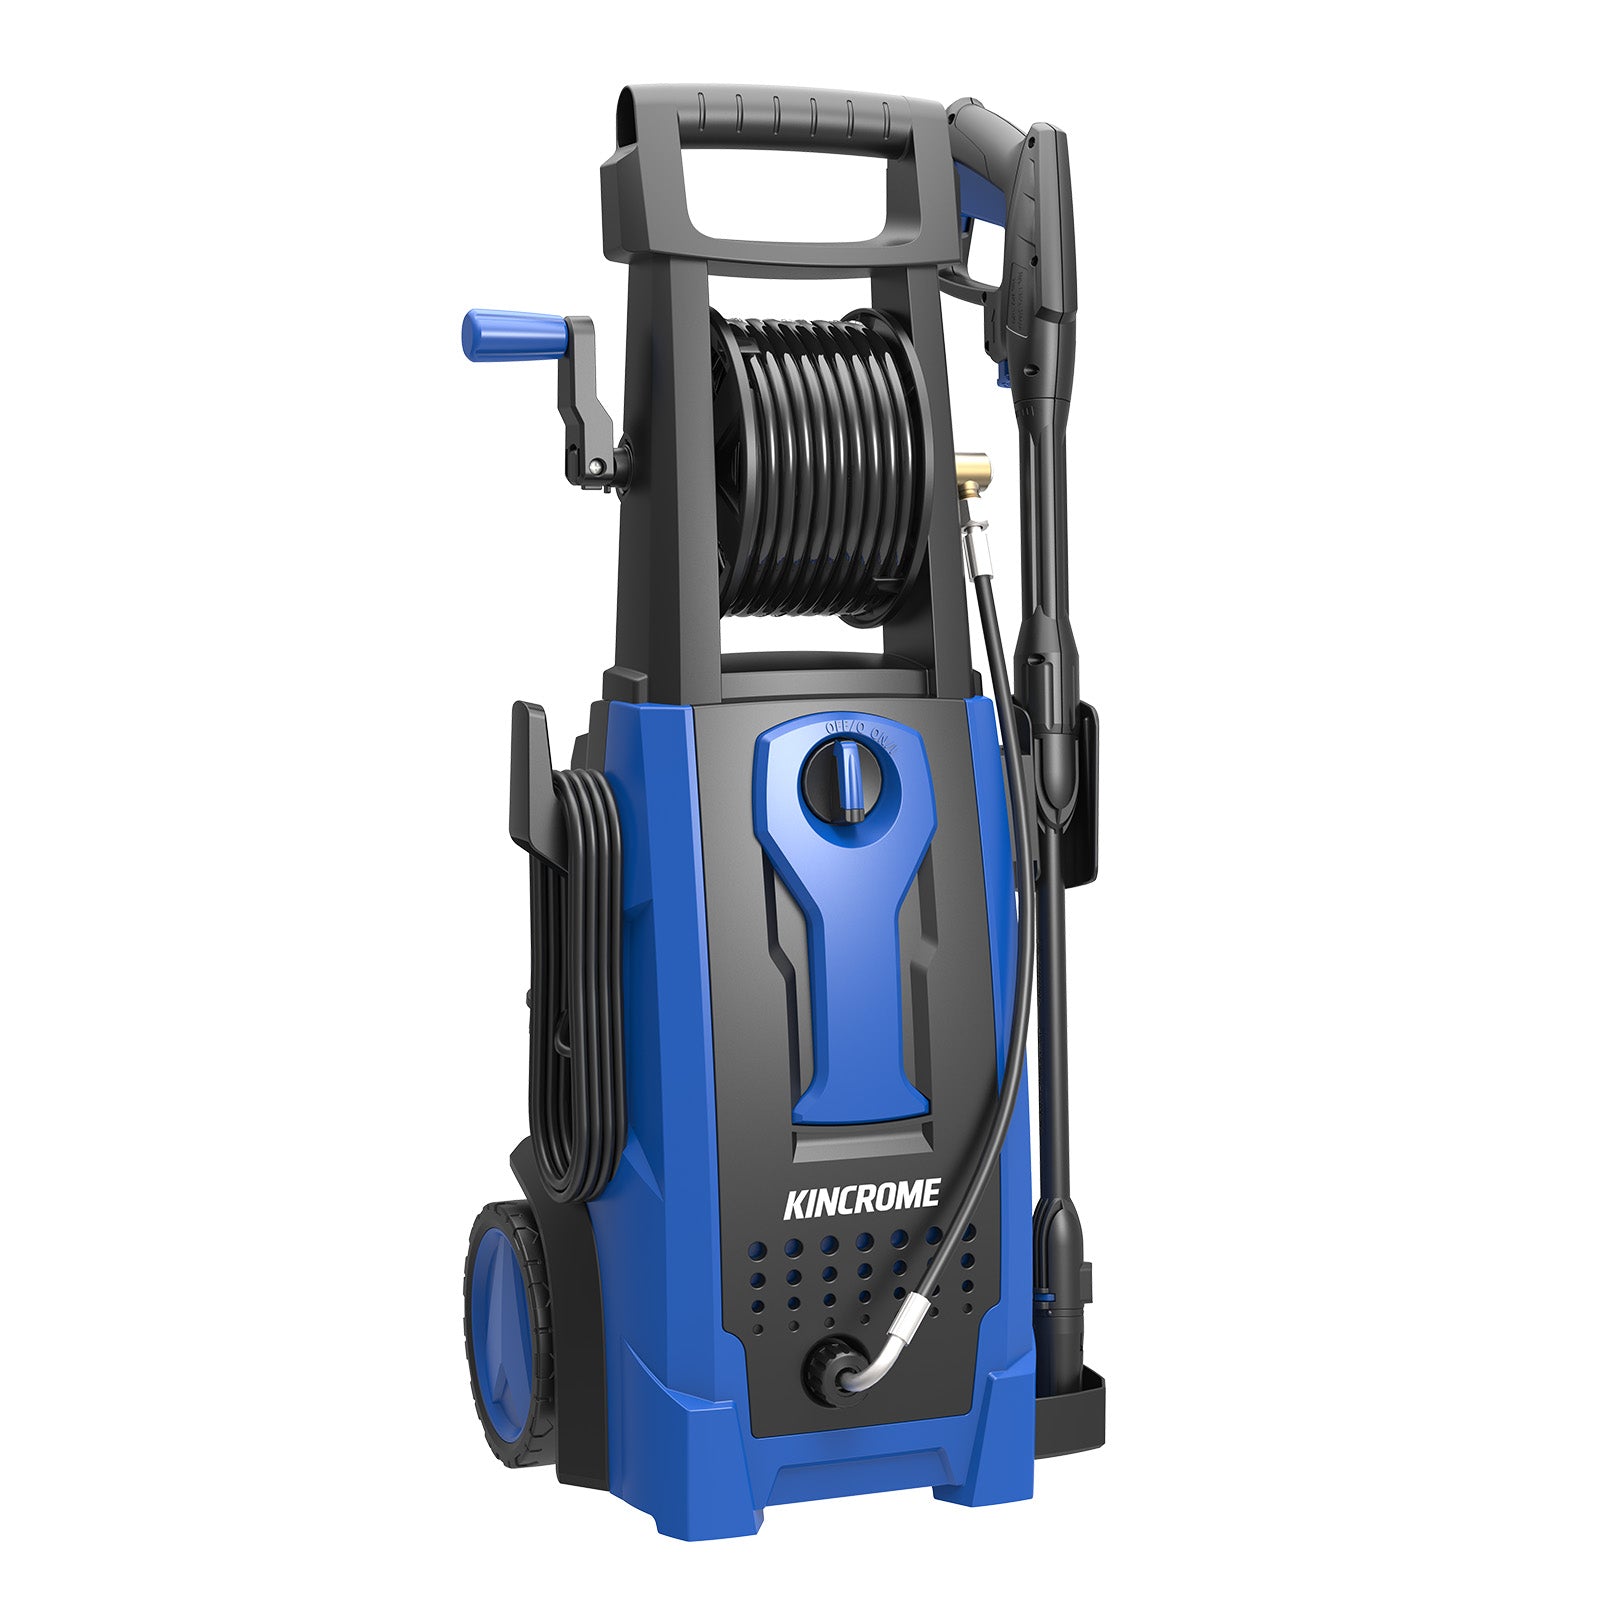 2400W Electric High-Pressure Washer, 2600psi, 8.0L/min, 8m Hose & Reel K16252 by Kincrome